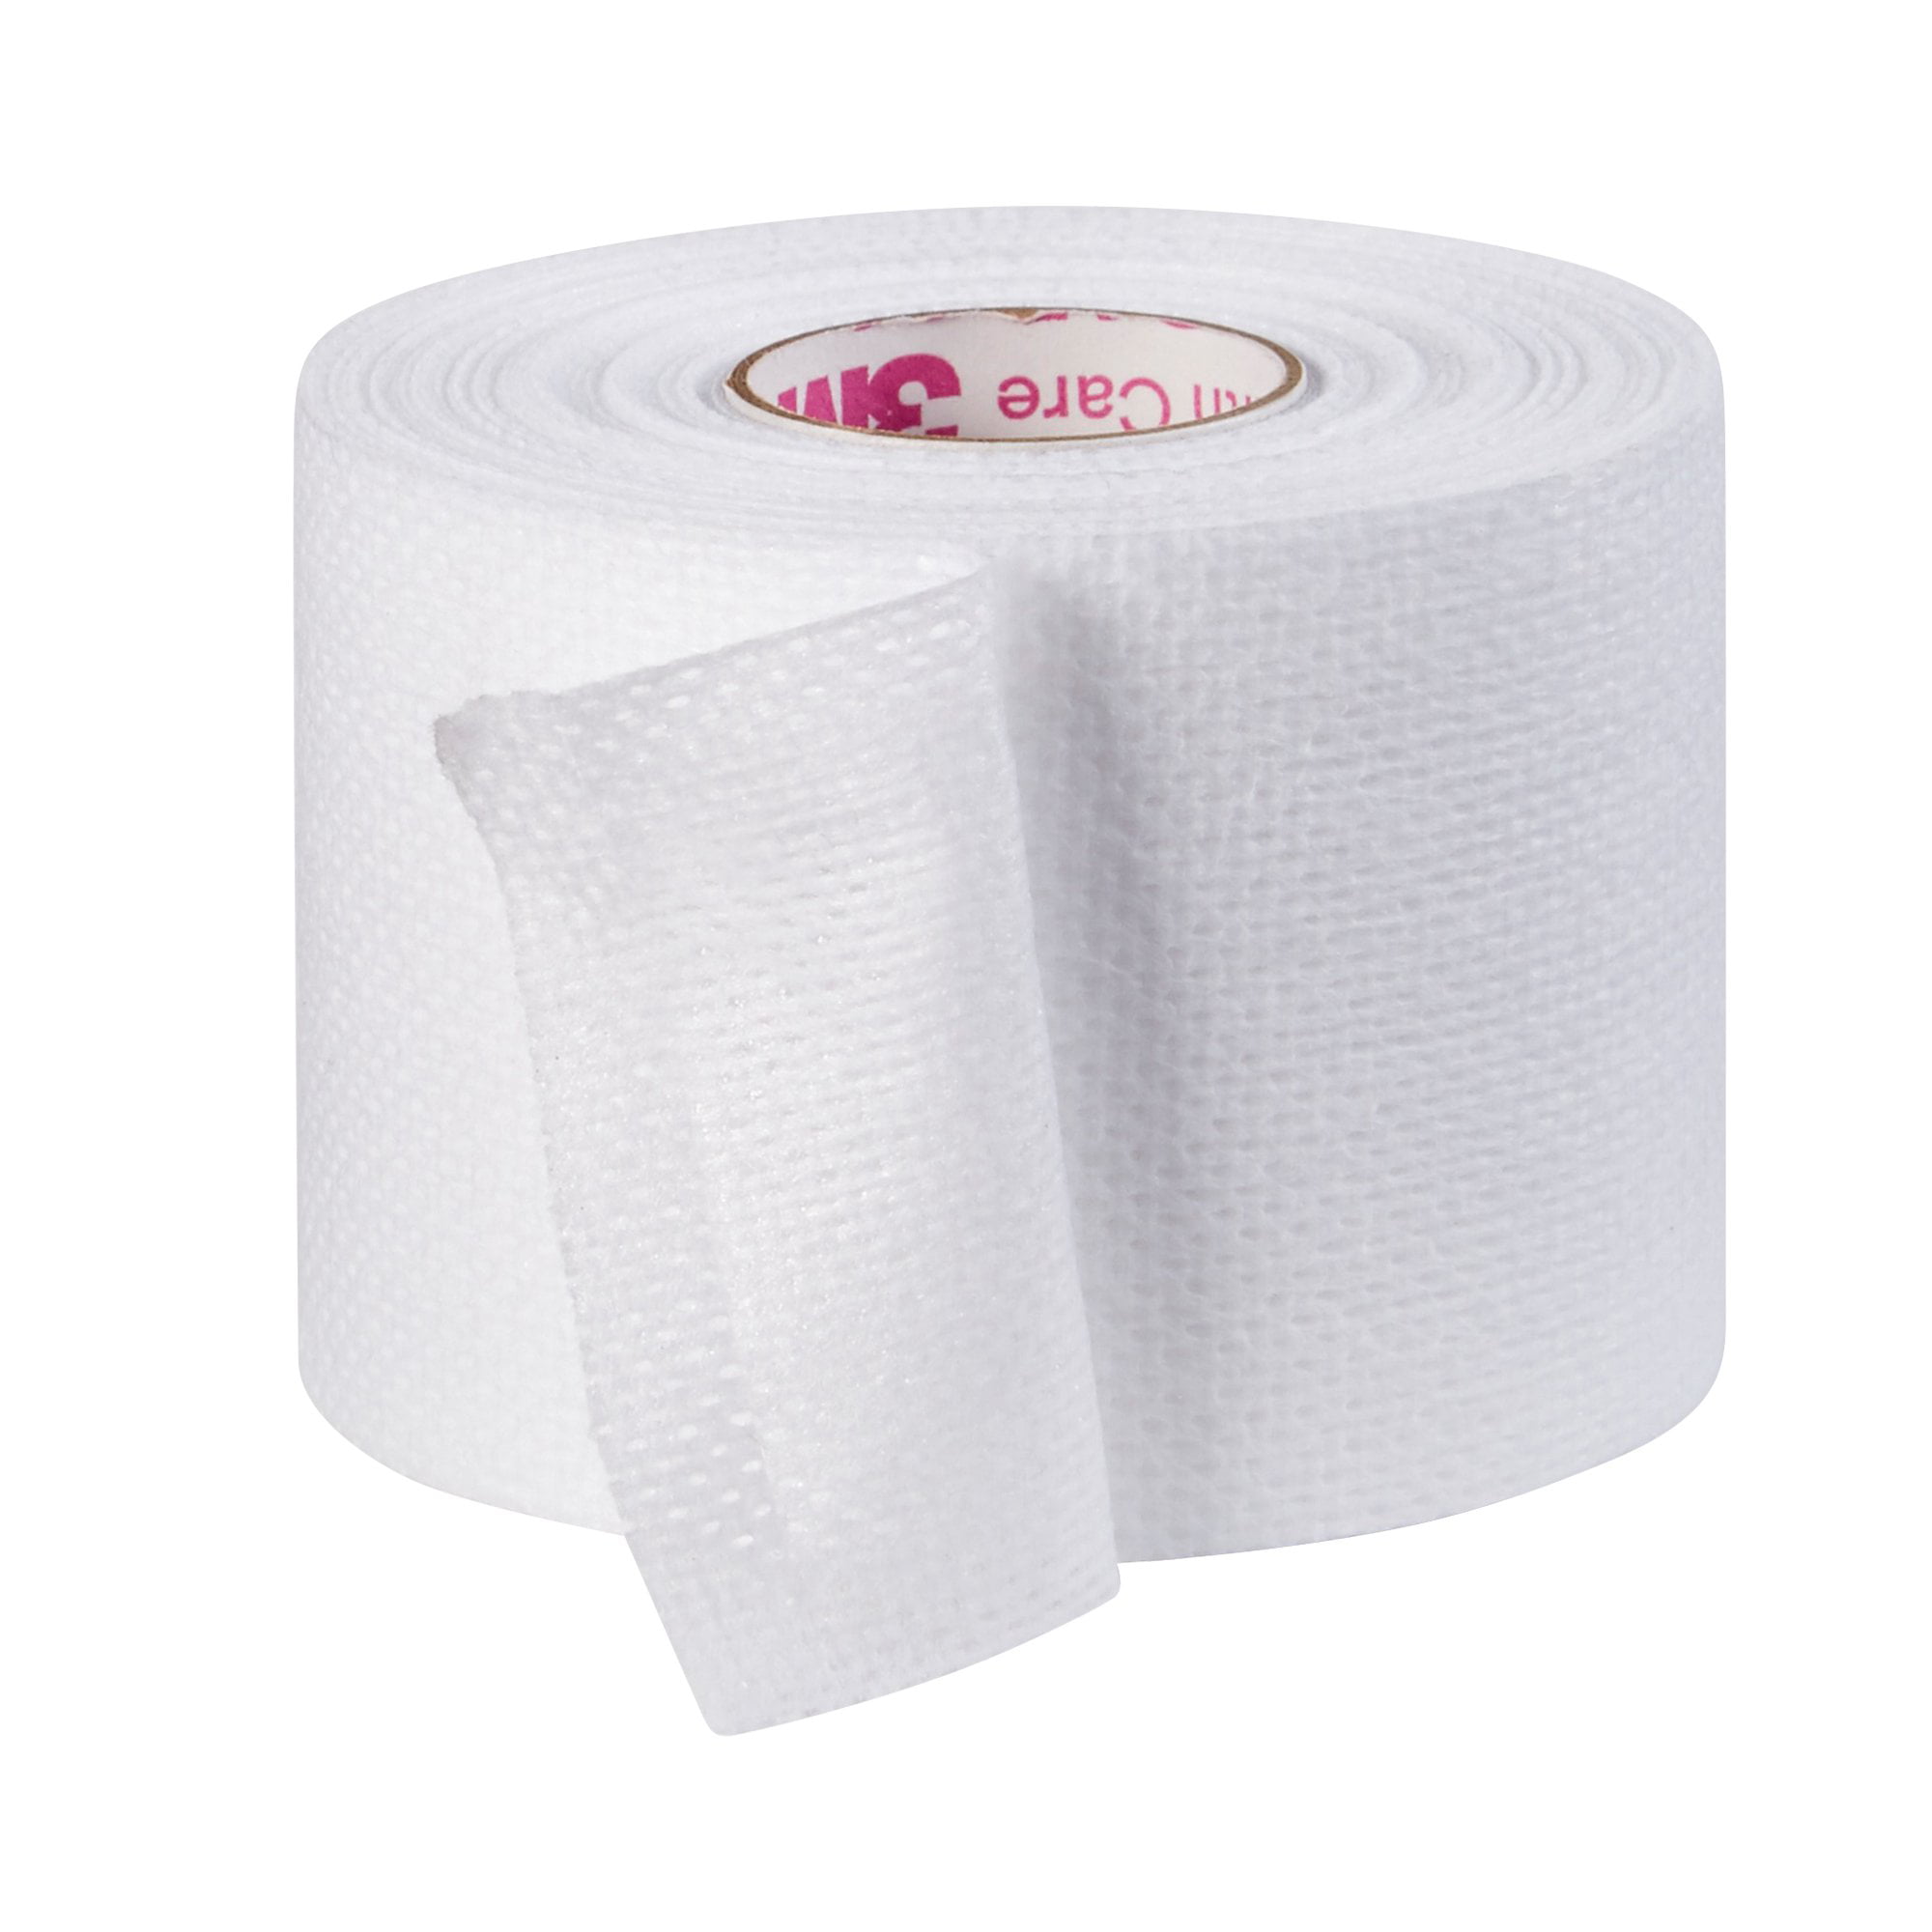 3M 2868 Medipore H Soft Cloth Surgical Tape 8 inch x 10 yd - 1 Roll